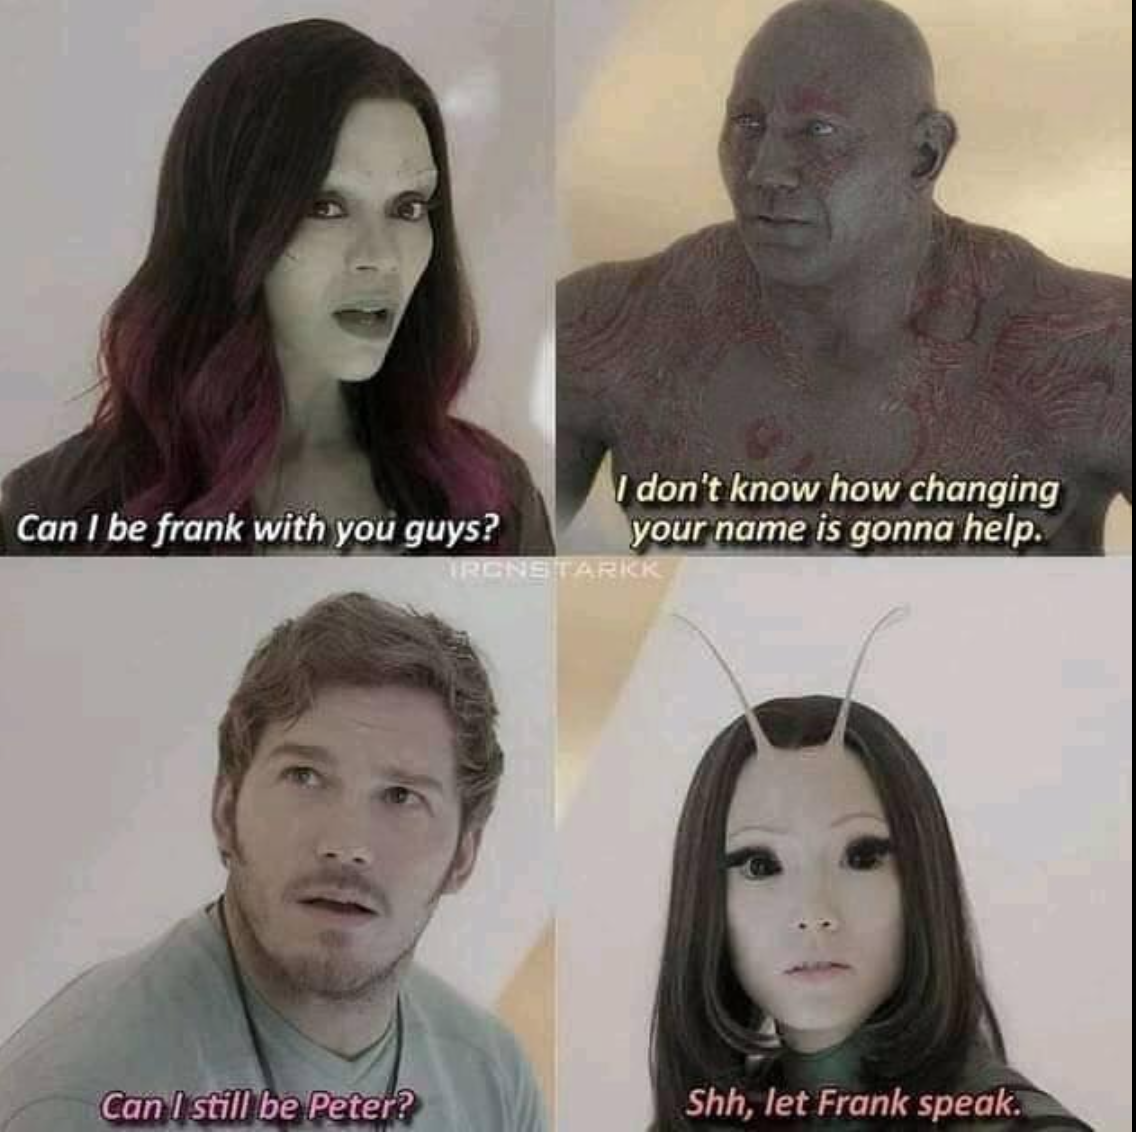 guardians of the galaxy can i be frank - I don't know how changing Can I be frank with you guys? your name is gonna help. Pronet Arkk Can I still be Peter? Shh, let Frank speak.